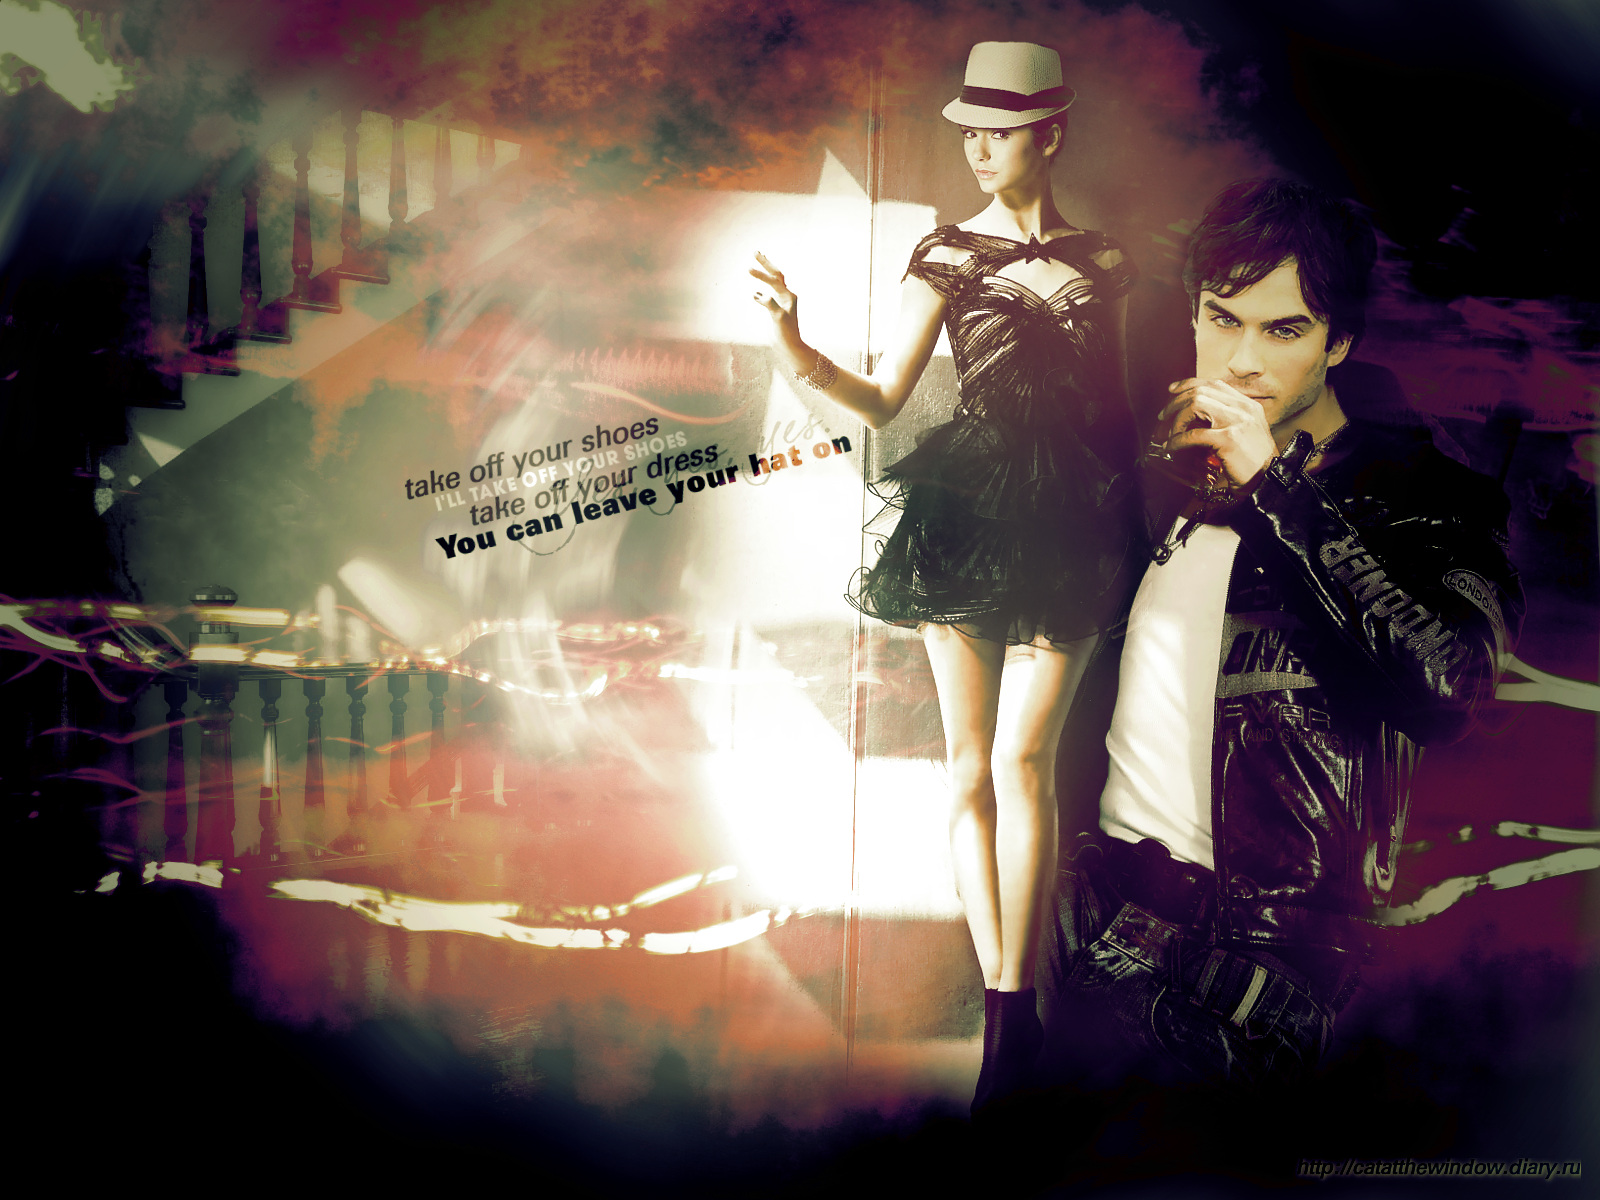 http://images5.fanpop.com/image/photos/29800000/You-can-leave-your-hat-on-damon-and-elena-29871822-1600-1200.jpg